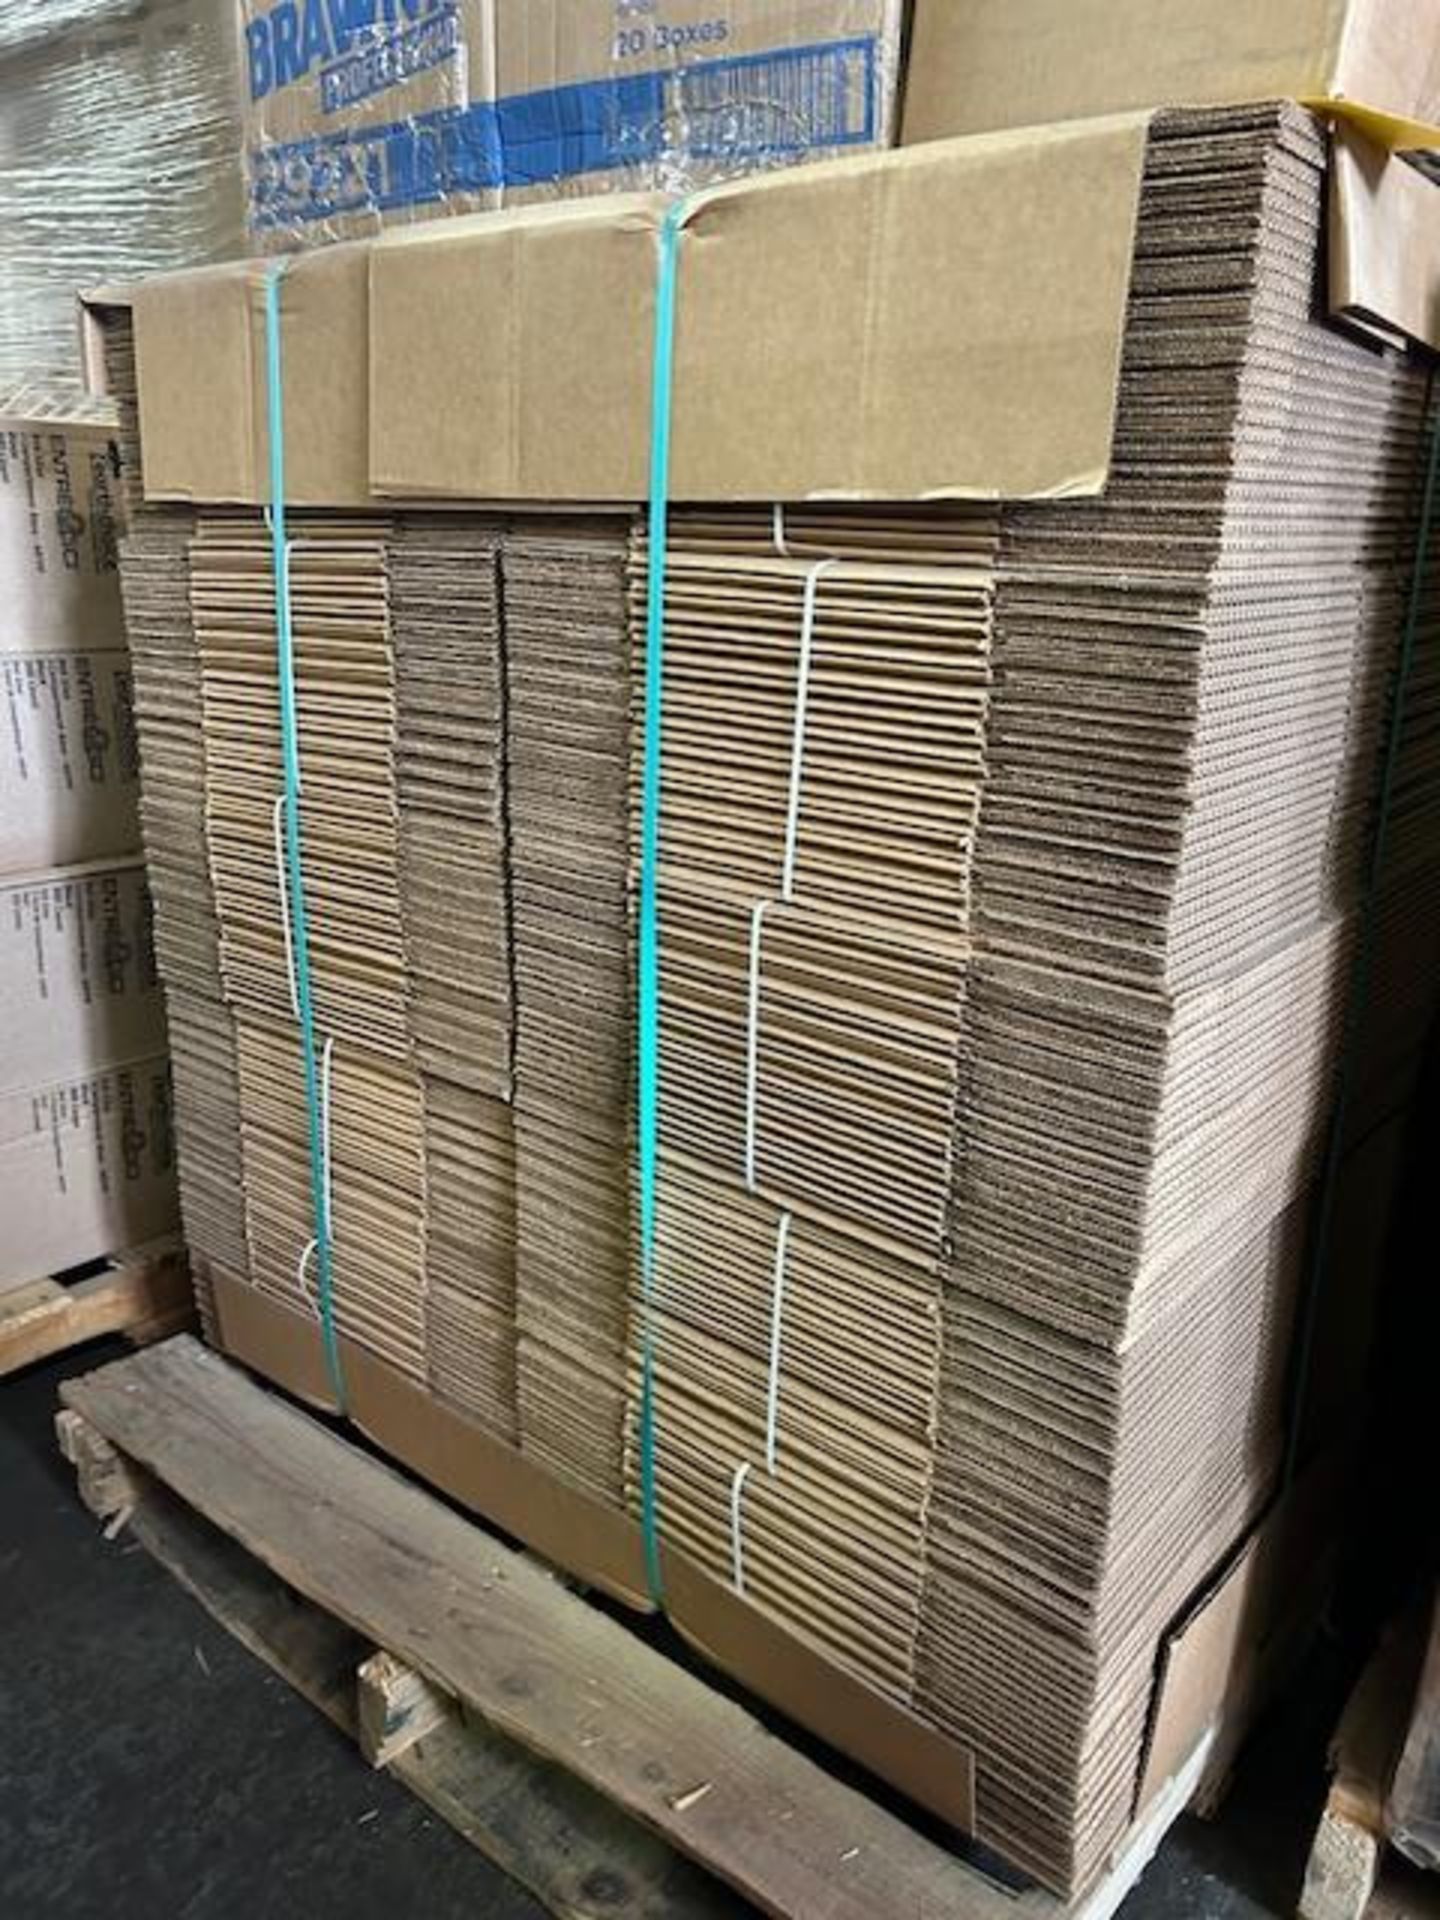 LOT - (500) 11-1/4 x 8-3/4 x 9-3/4 Brown Corrugated Boxes - Image 2 of 2